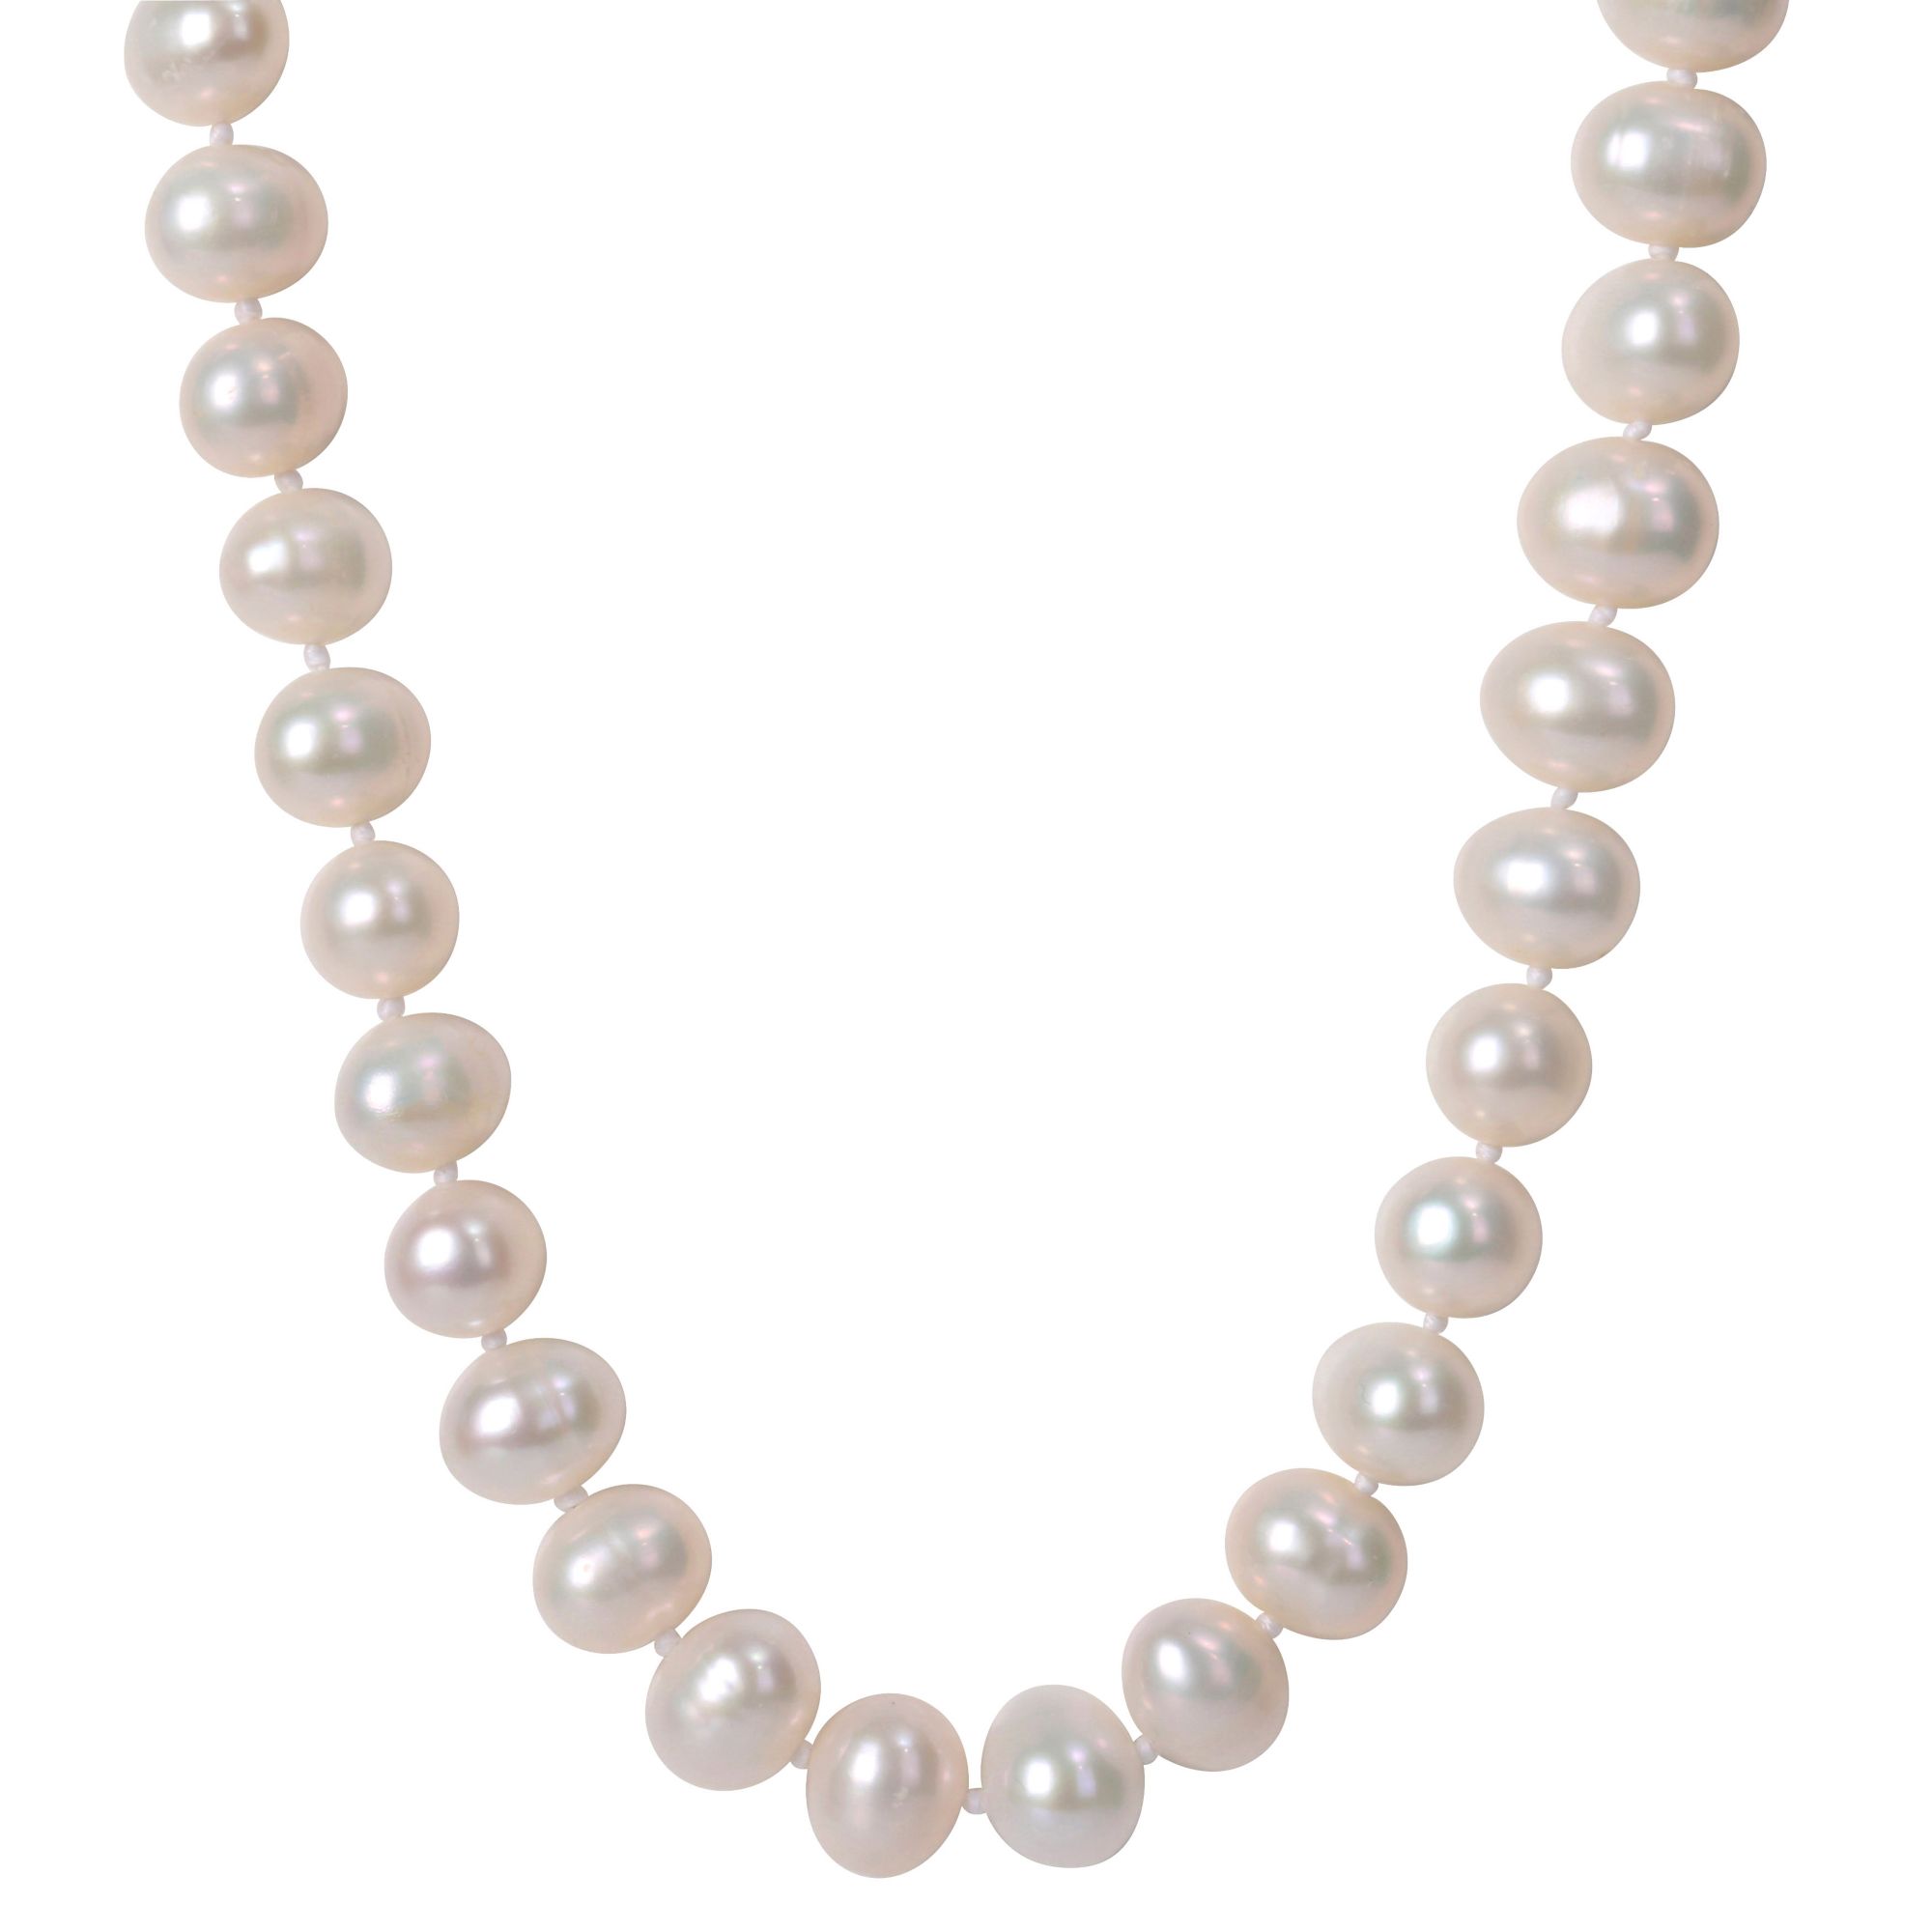 7.5-8mm Cultured Freshwater Pearl 24&quot; Strand Necklace with Sterling Silver Clasp